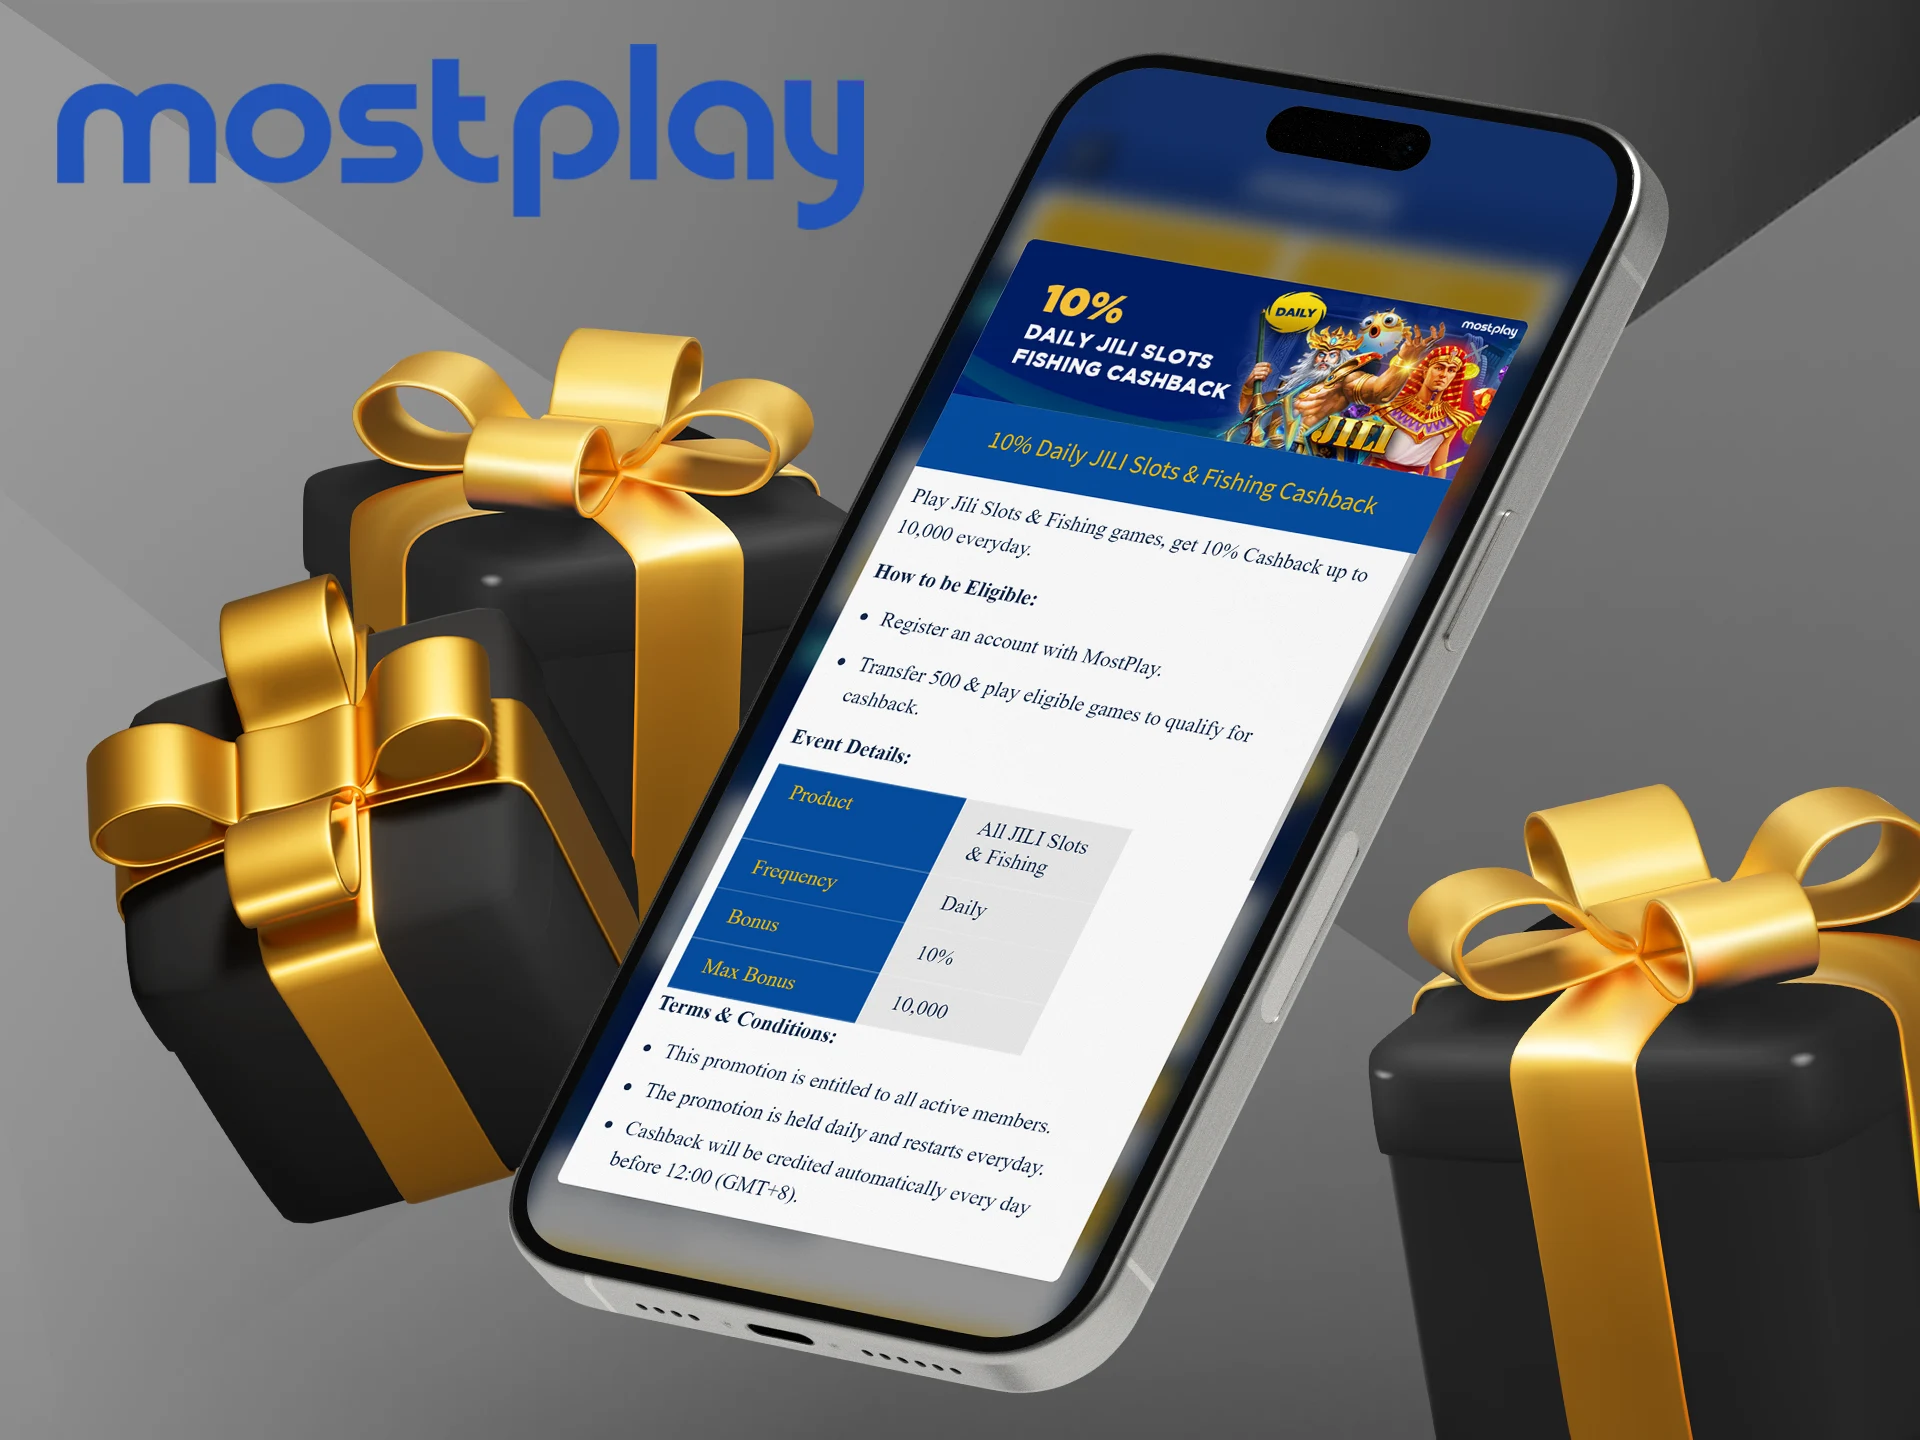 Take the opportunity to get cashback by playing fishing games at Mostplay.